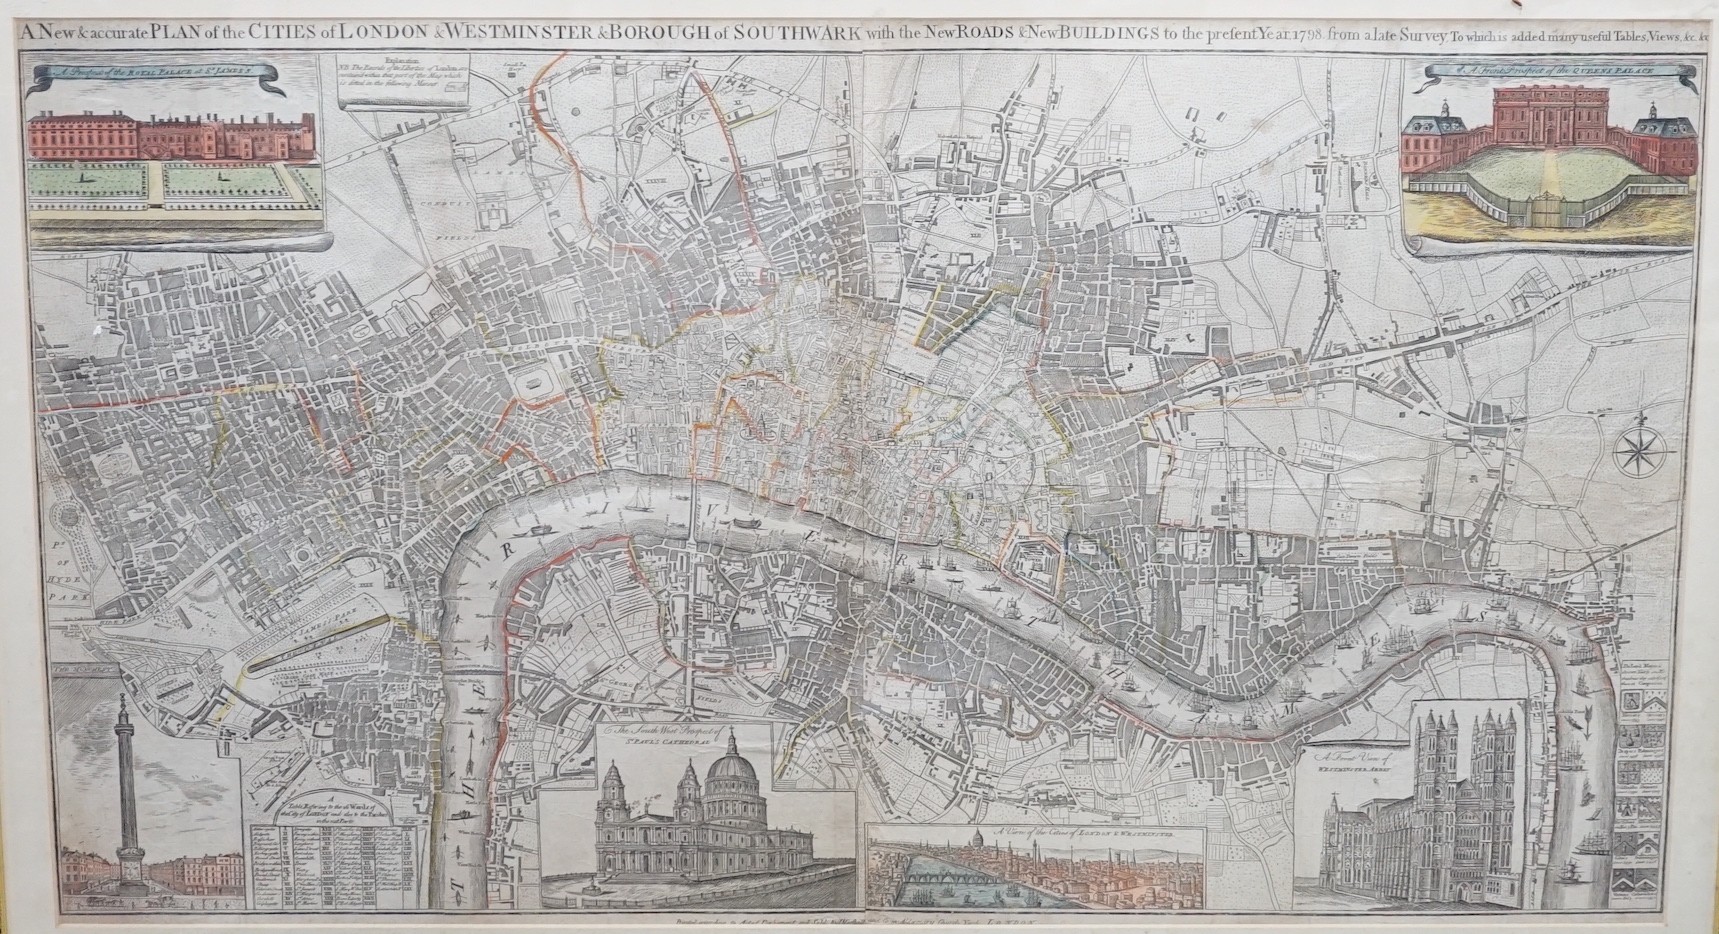 I. Marshall Publ., coloured engraving, New and Accurate Plan of the Cities London & Westminster & Borough of Southward, 1790, 59 x 104cm